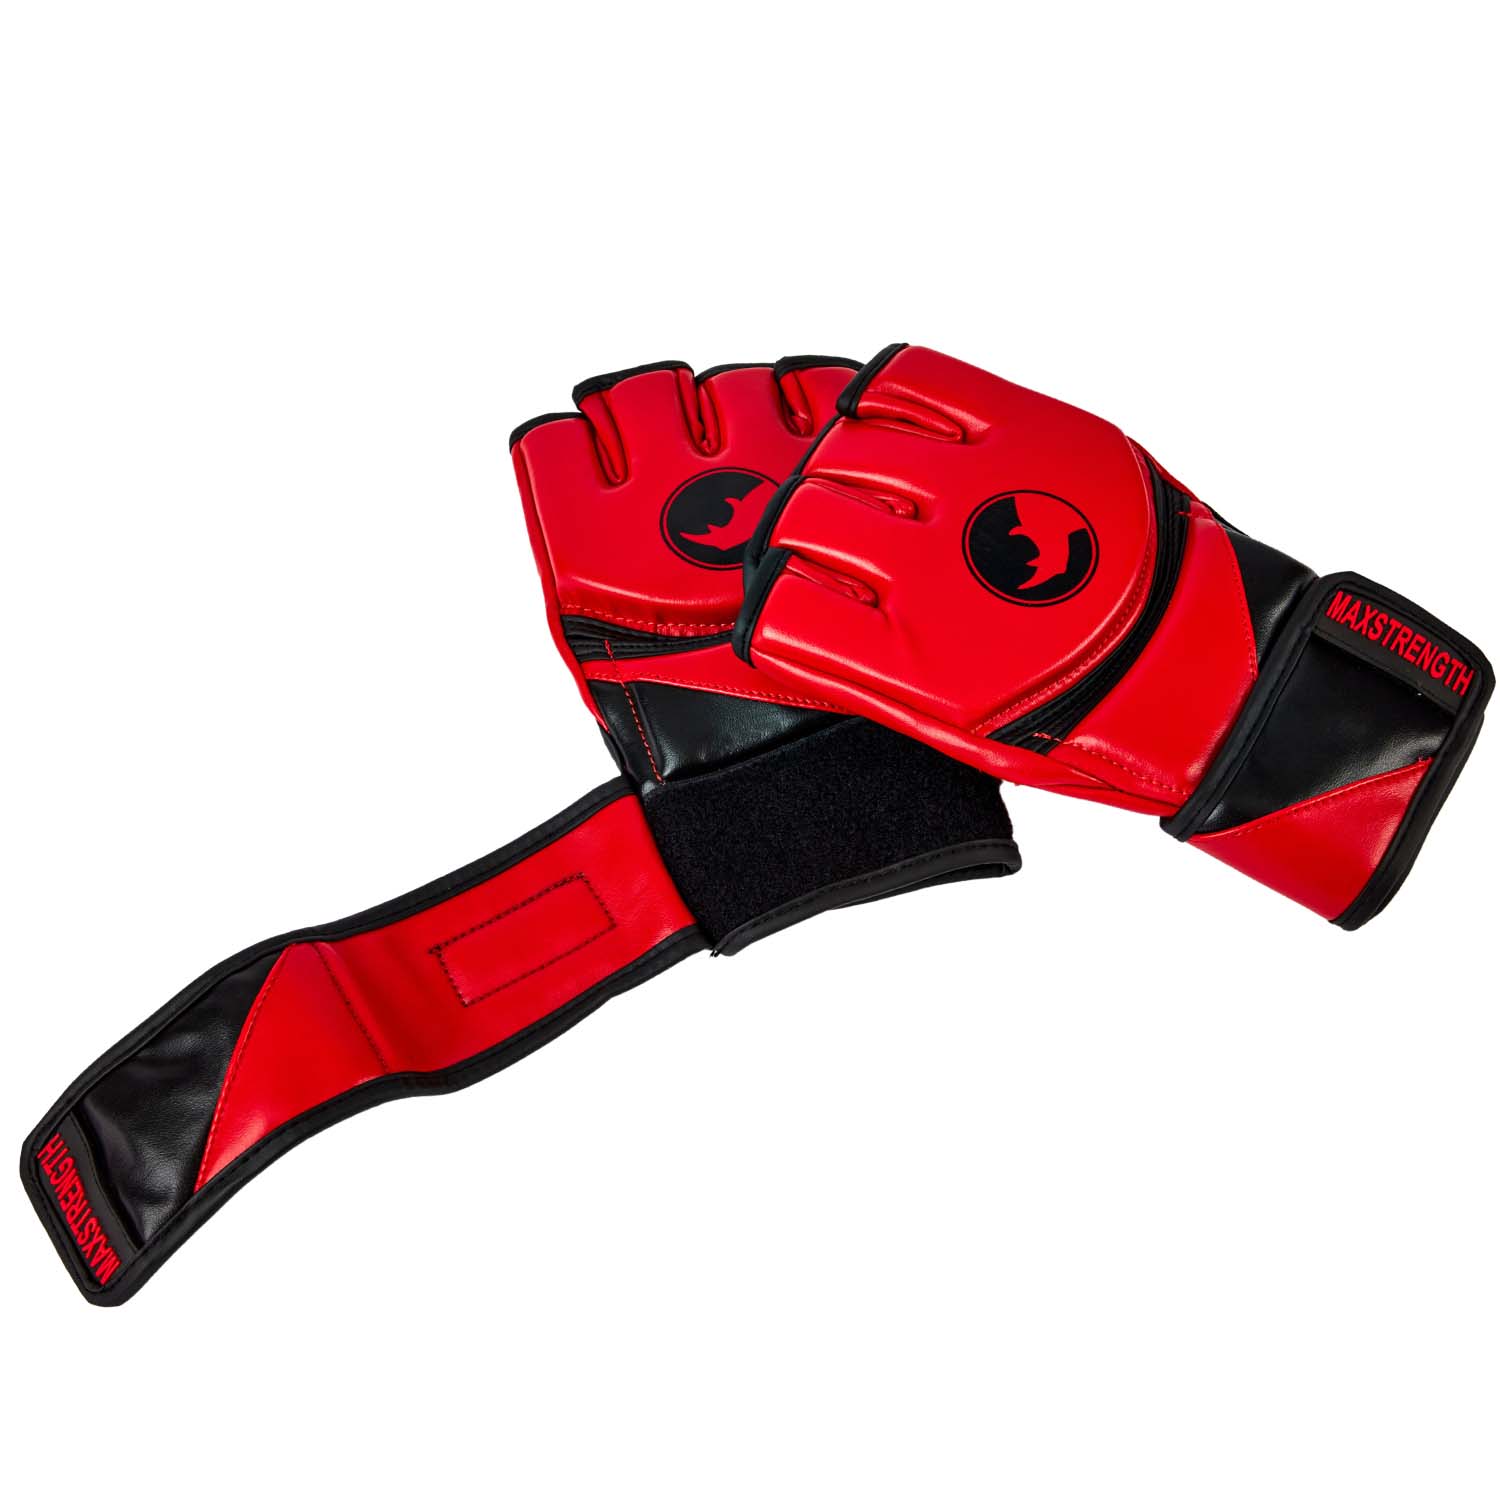 mma grappling gloves